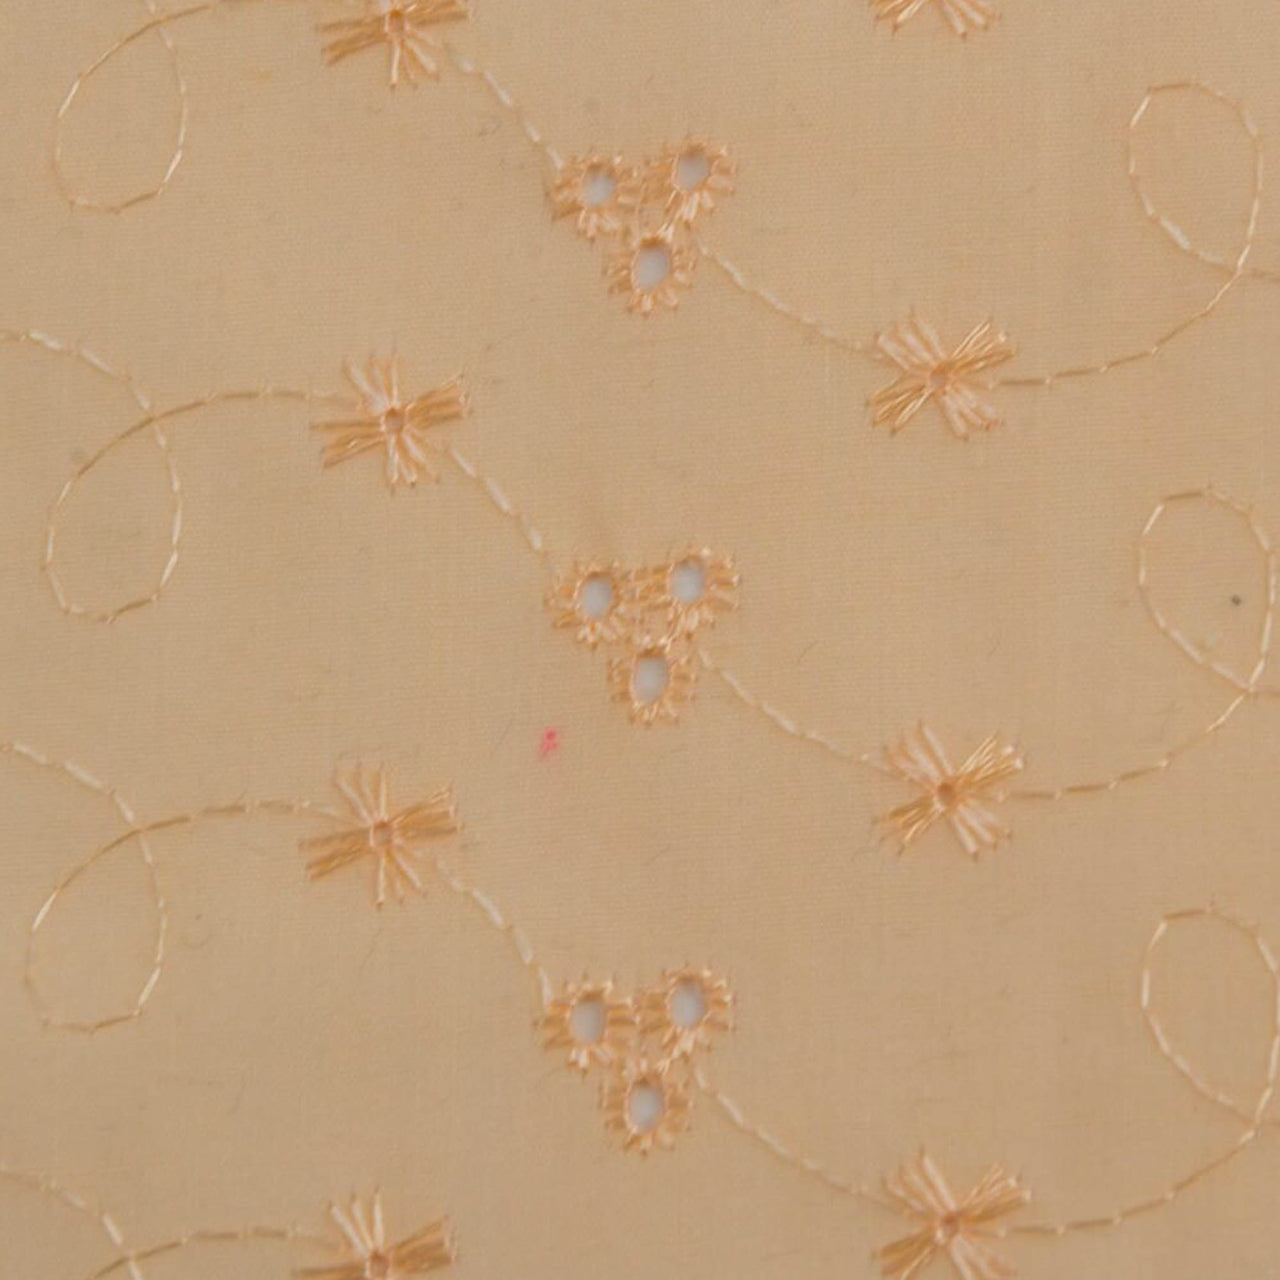 Peach - Broderie Anglaise - 3 Hole Embroidered Poly Cotton Fabric